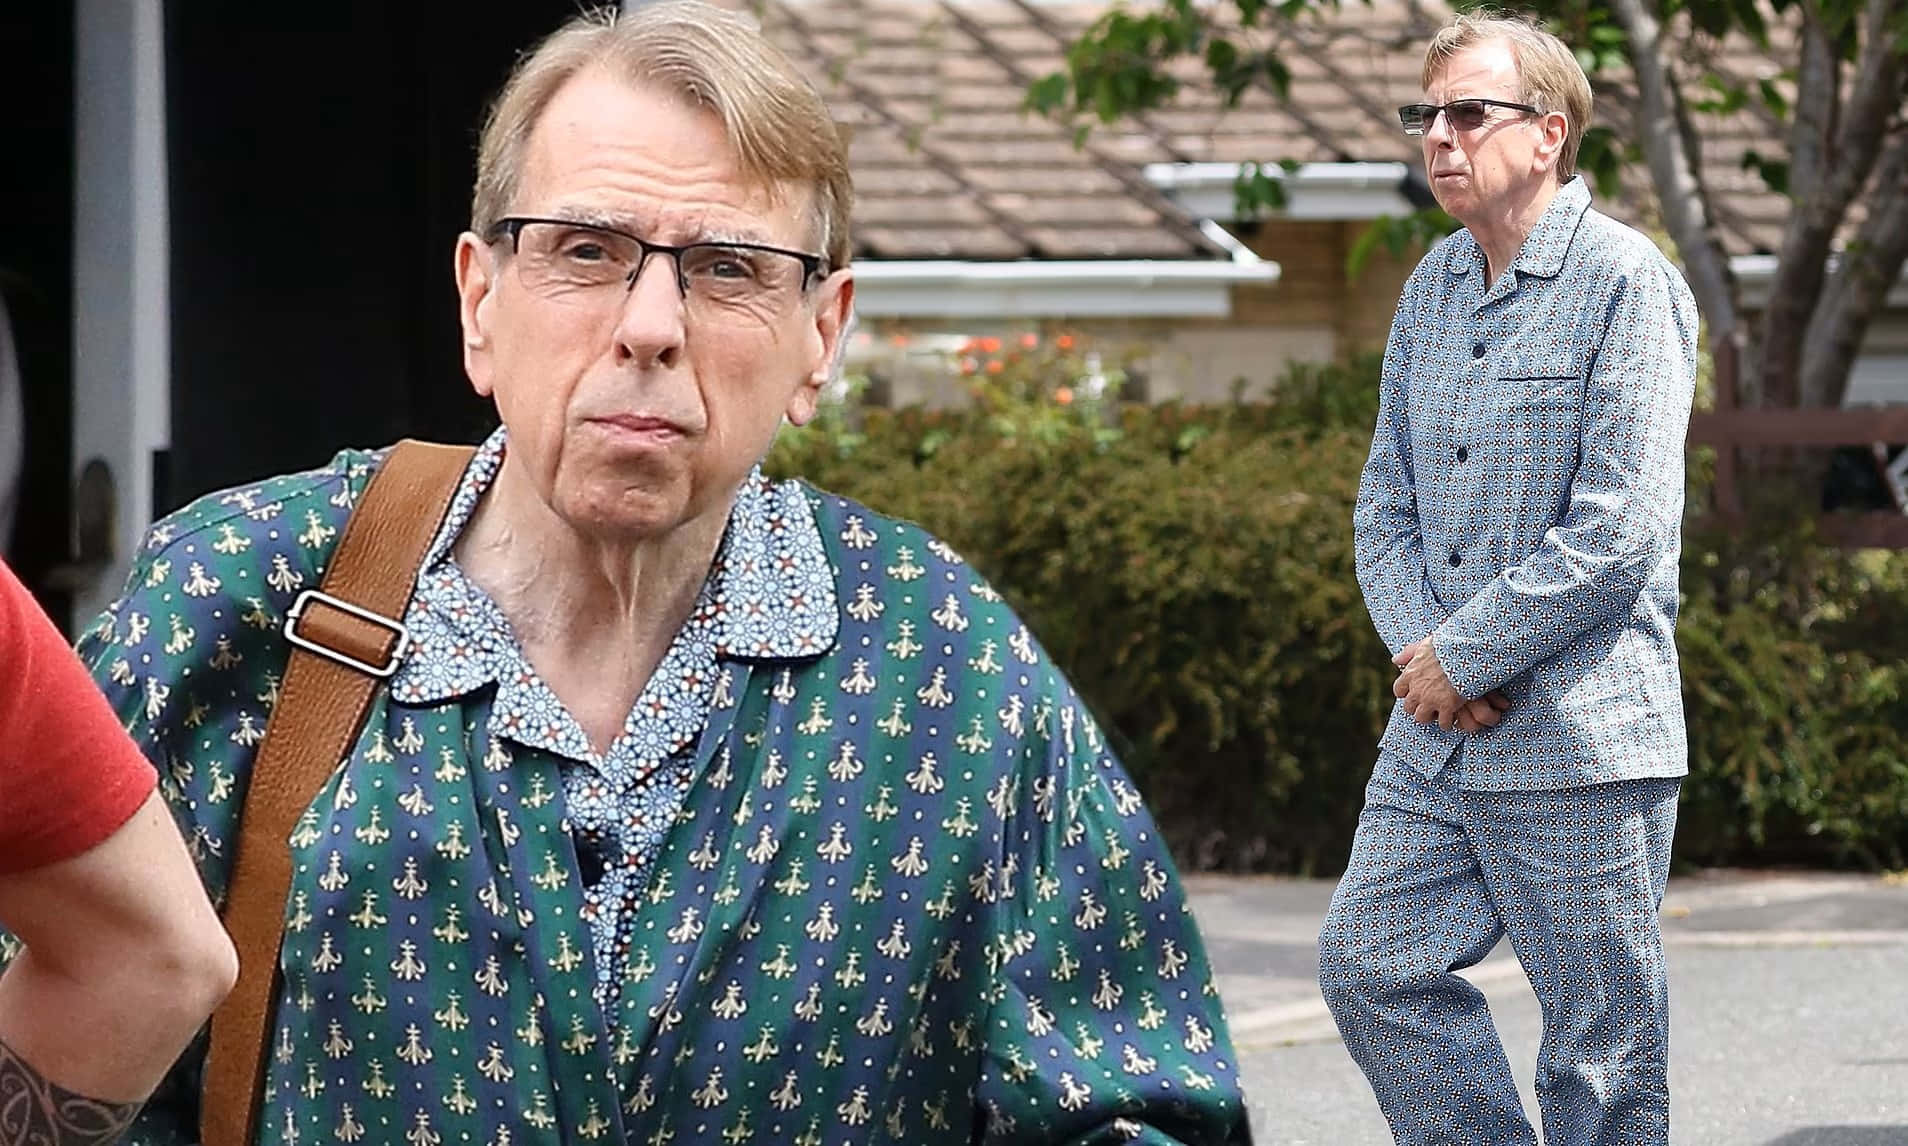 Timothy Spall Smiling in a Pensive State Wallpaper